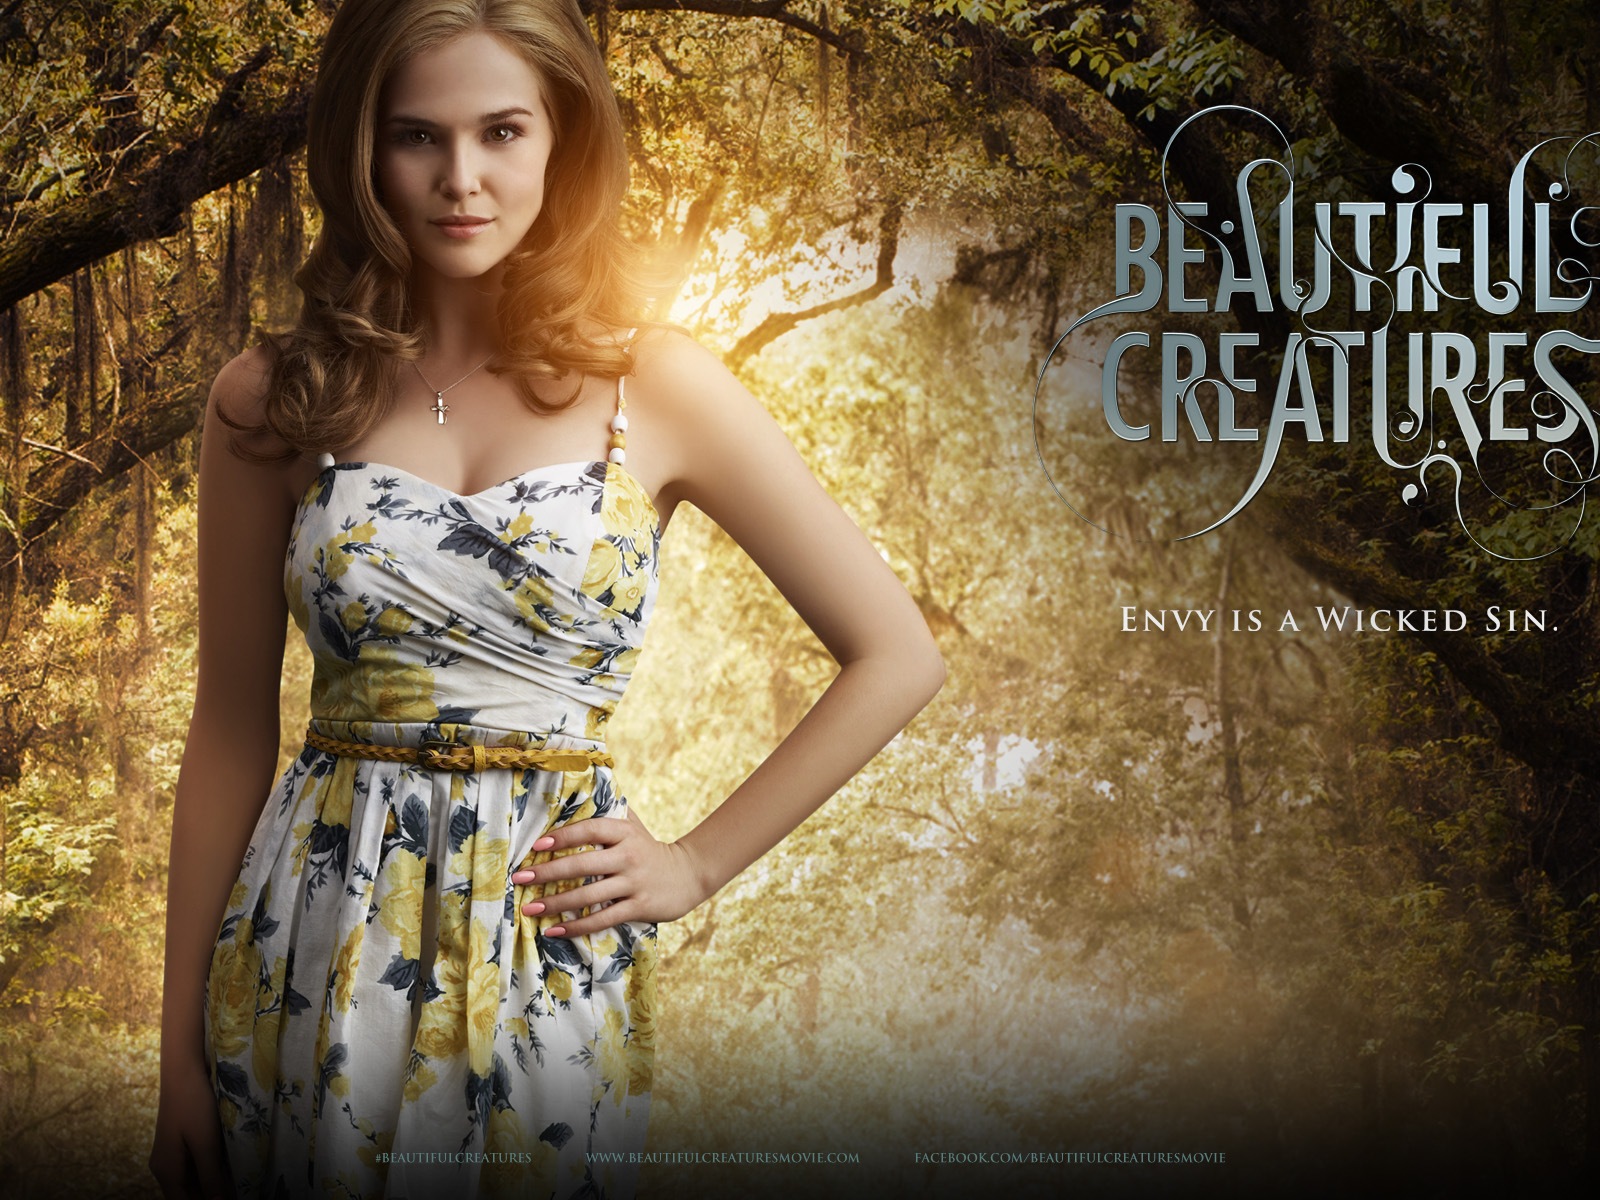 Beautiful Creatures 2013 HD movie wallpapers #20 - 1600x1200